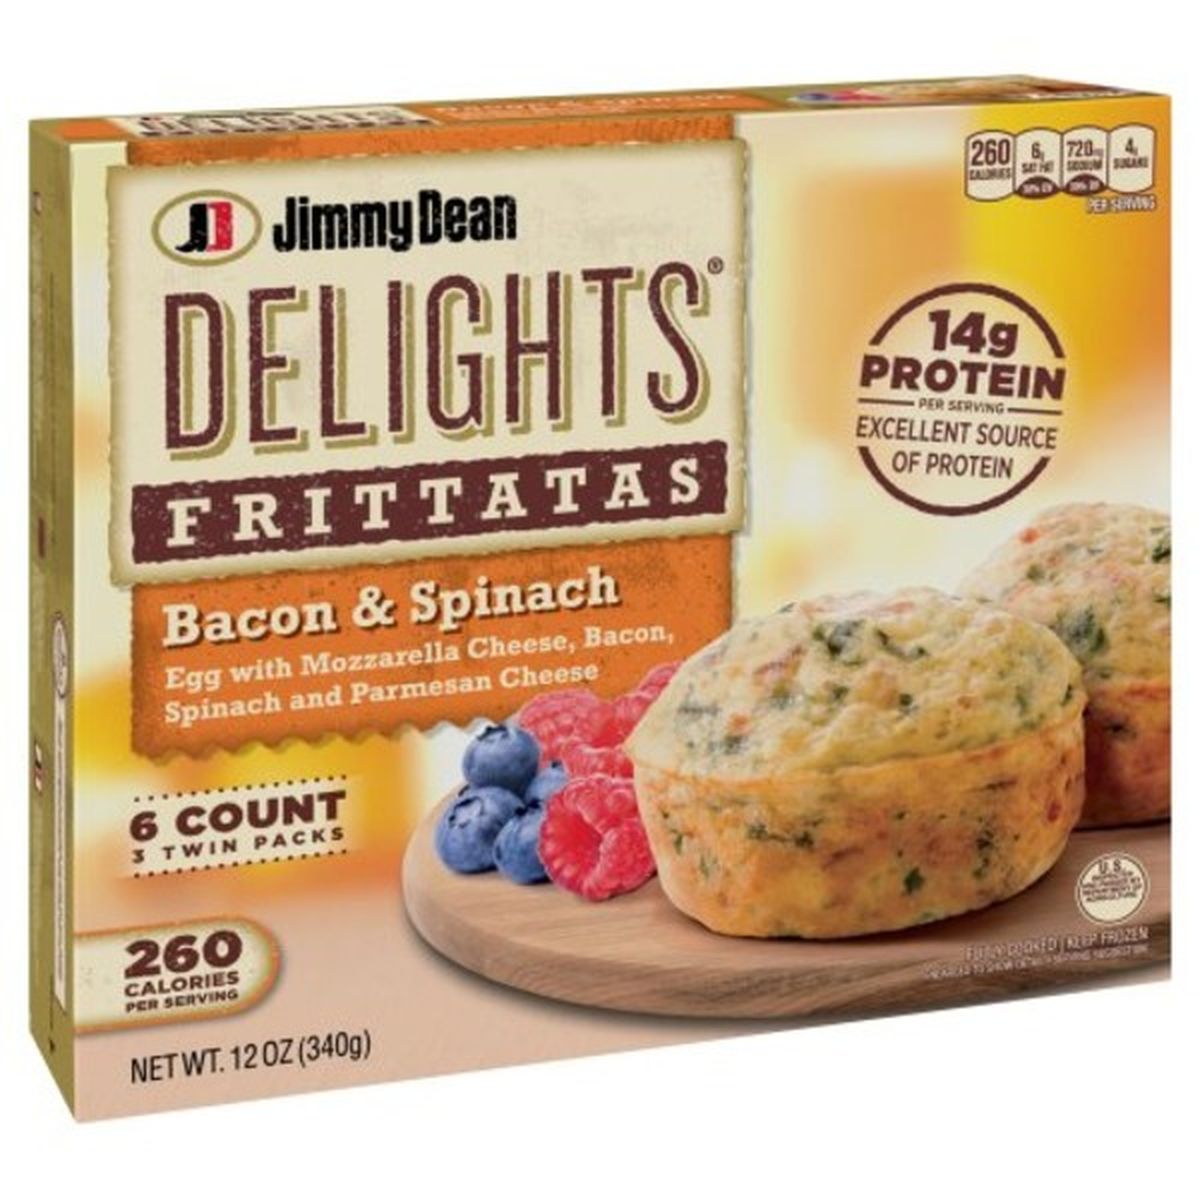 Calories in Jimmy Dean Delights Jimmy Dean Delights Bacon & Spinach Frittatas